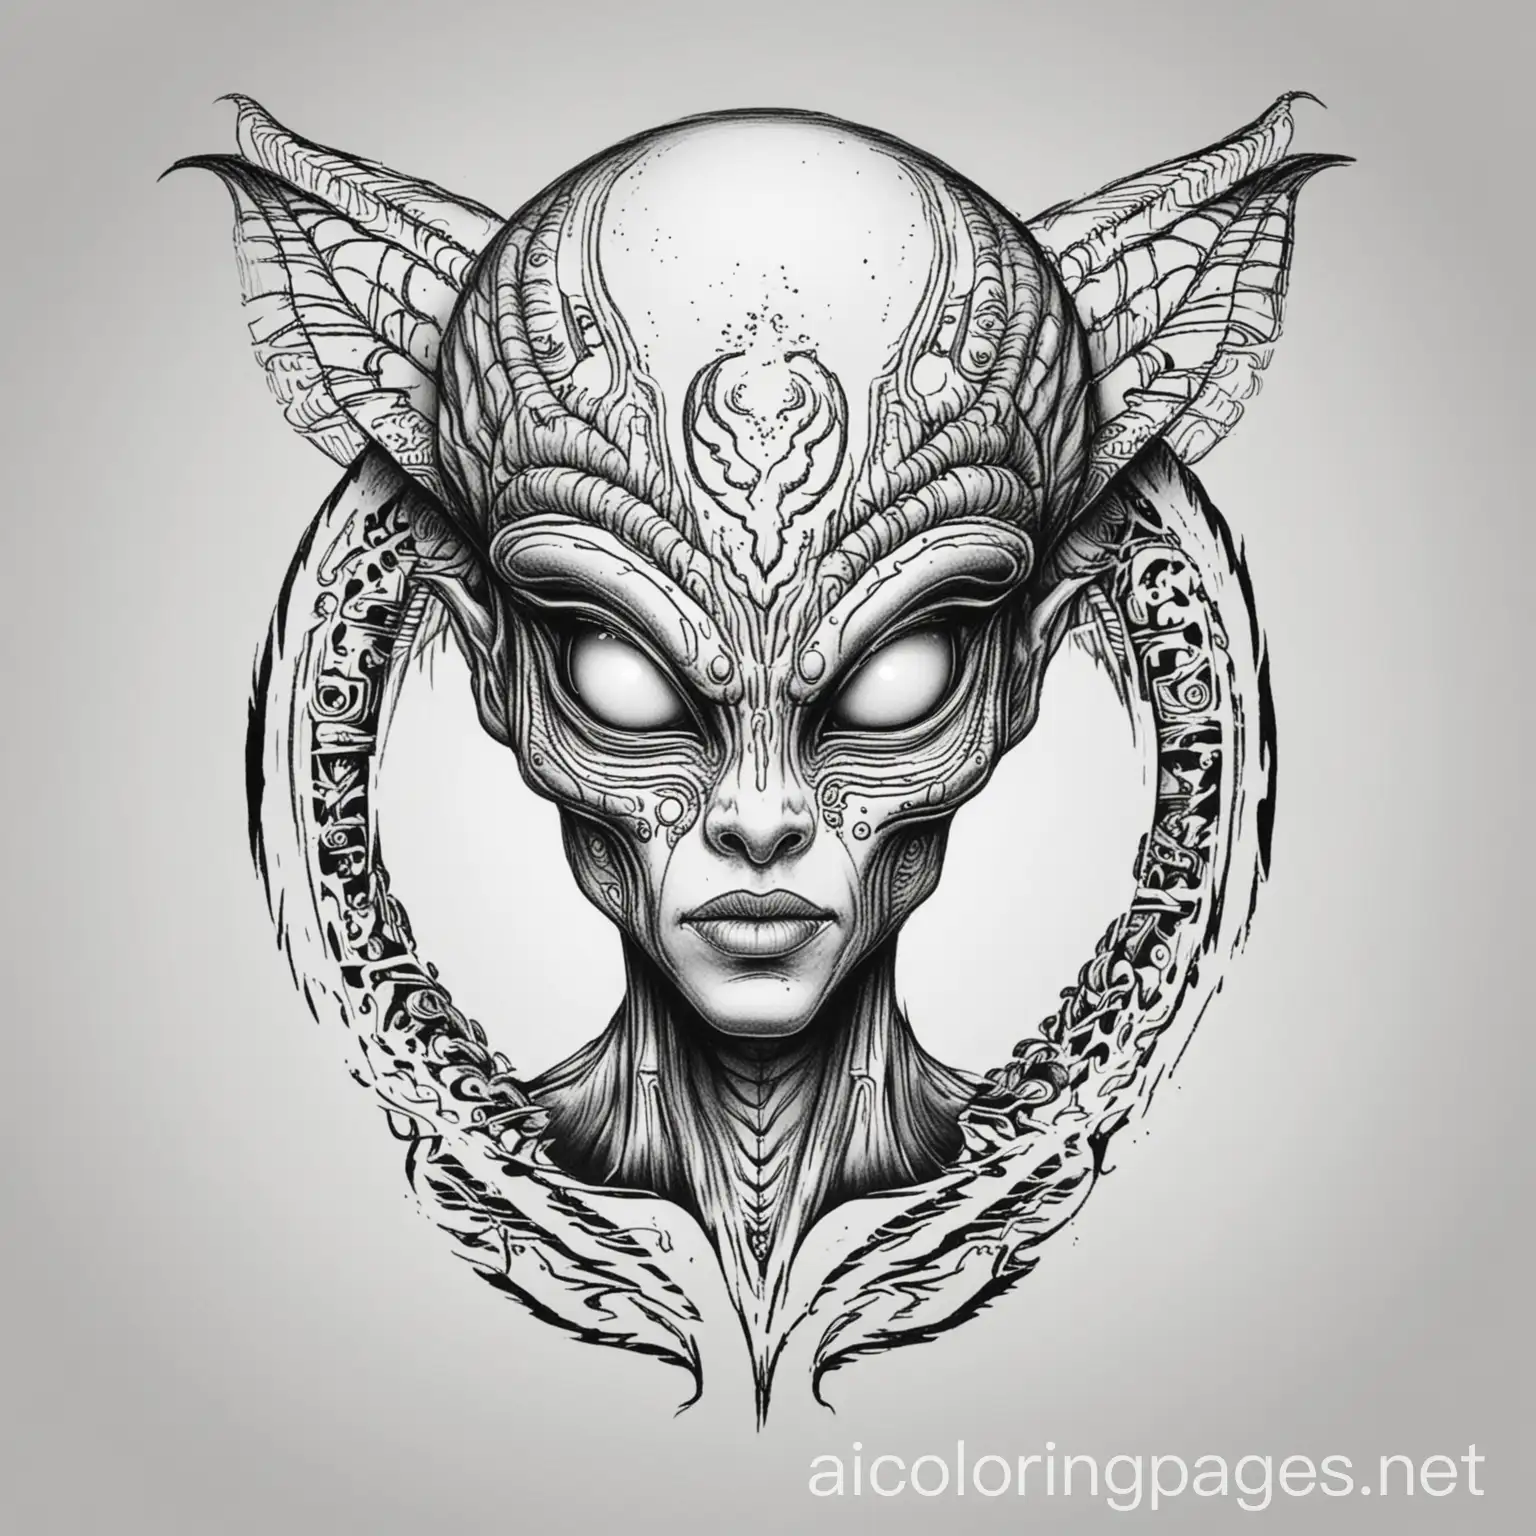 Alien, tattoo, vector, simple, coloring book, Coloring Page, black and white, line art, white background, Simplicity, Ample White Space. The background of the coloring page is plain white to make it easy for young children to color within the lines. The outlines of all the subjects are easy to distinguish, making it simple for kids to color without too much difficulty